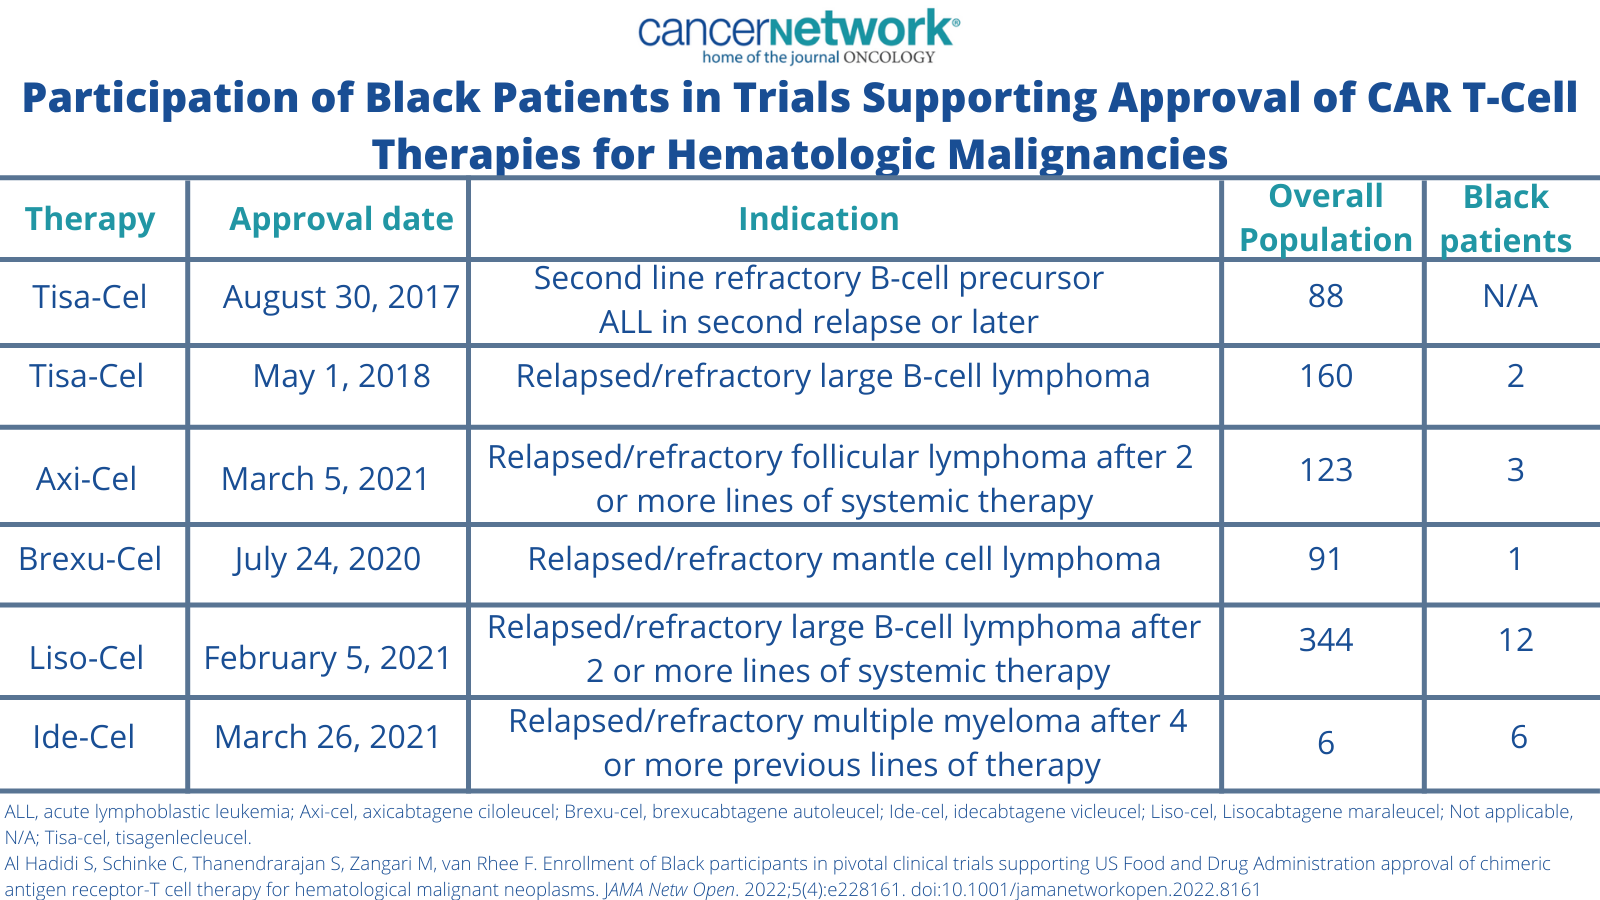 Participation of Black Patients in Trials Supporting Approval of CAR T-Cell Therapies for Hematologic Malignancies 